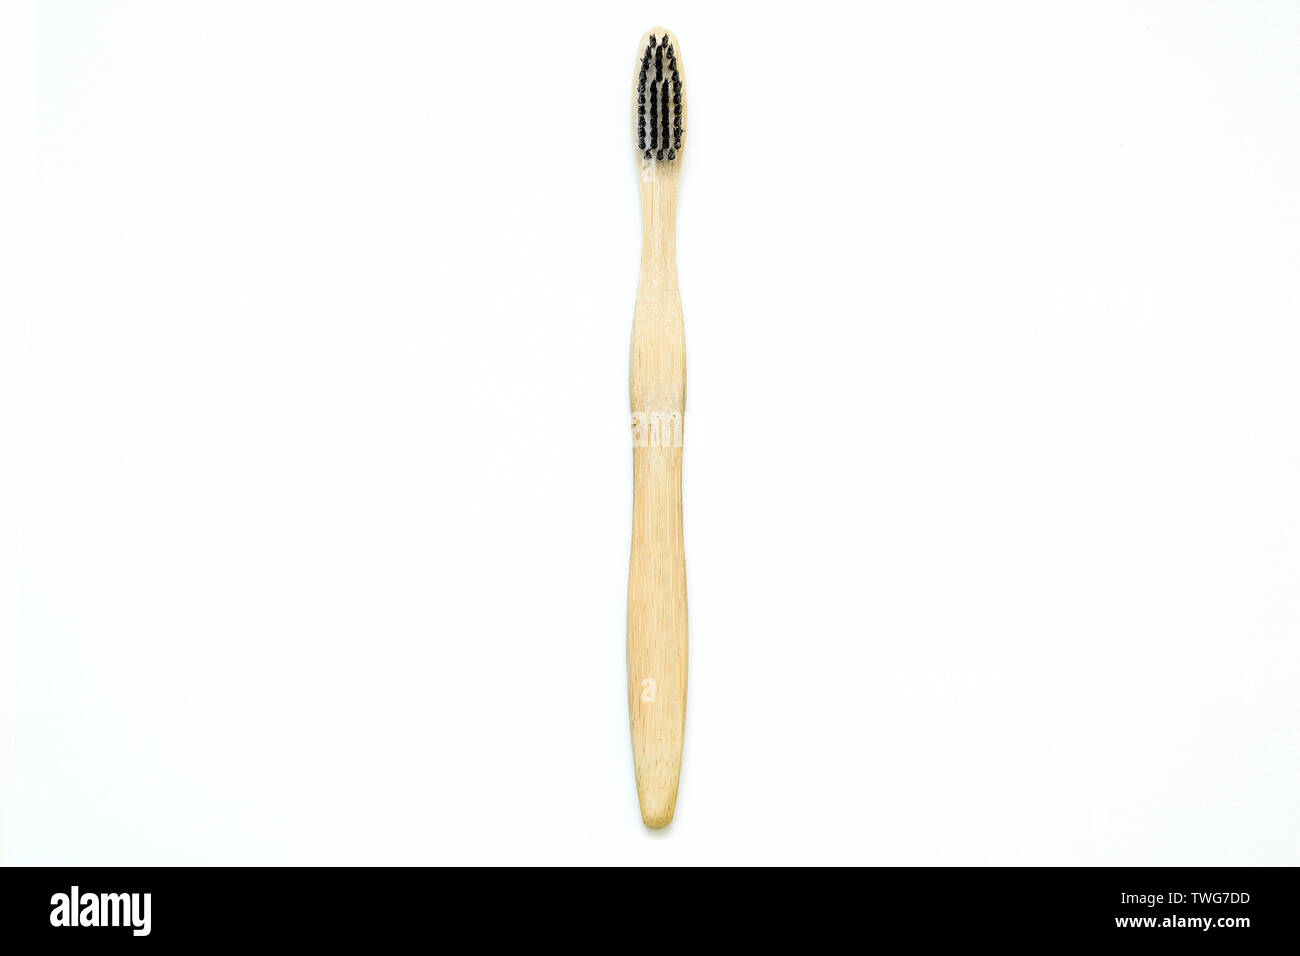 A toothbrush from natural materials. Made from bamboo wood. Isolated on a white background. Stock Photo